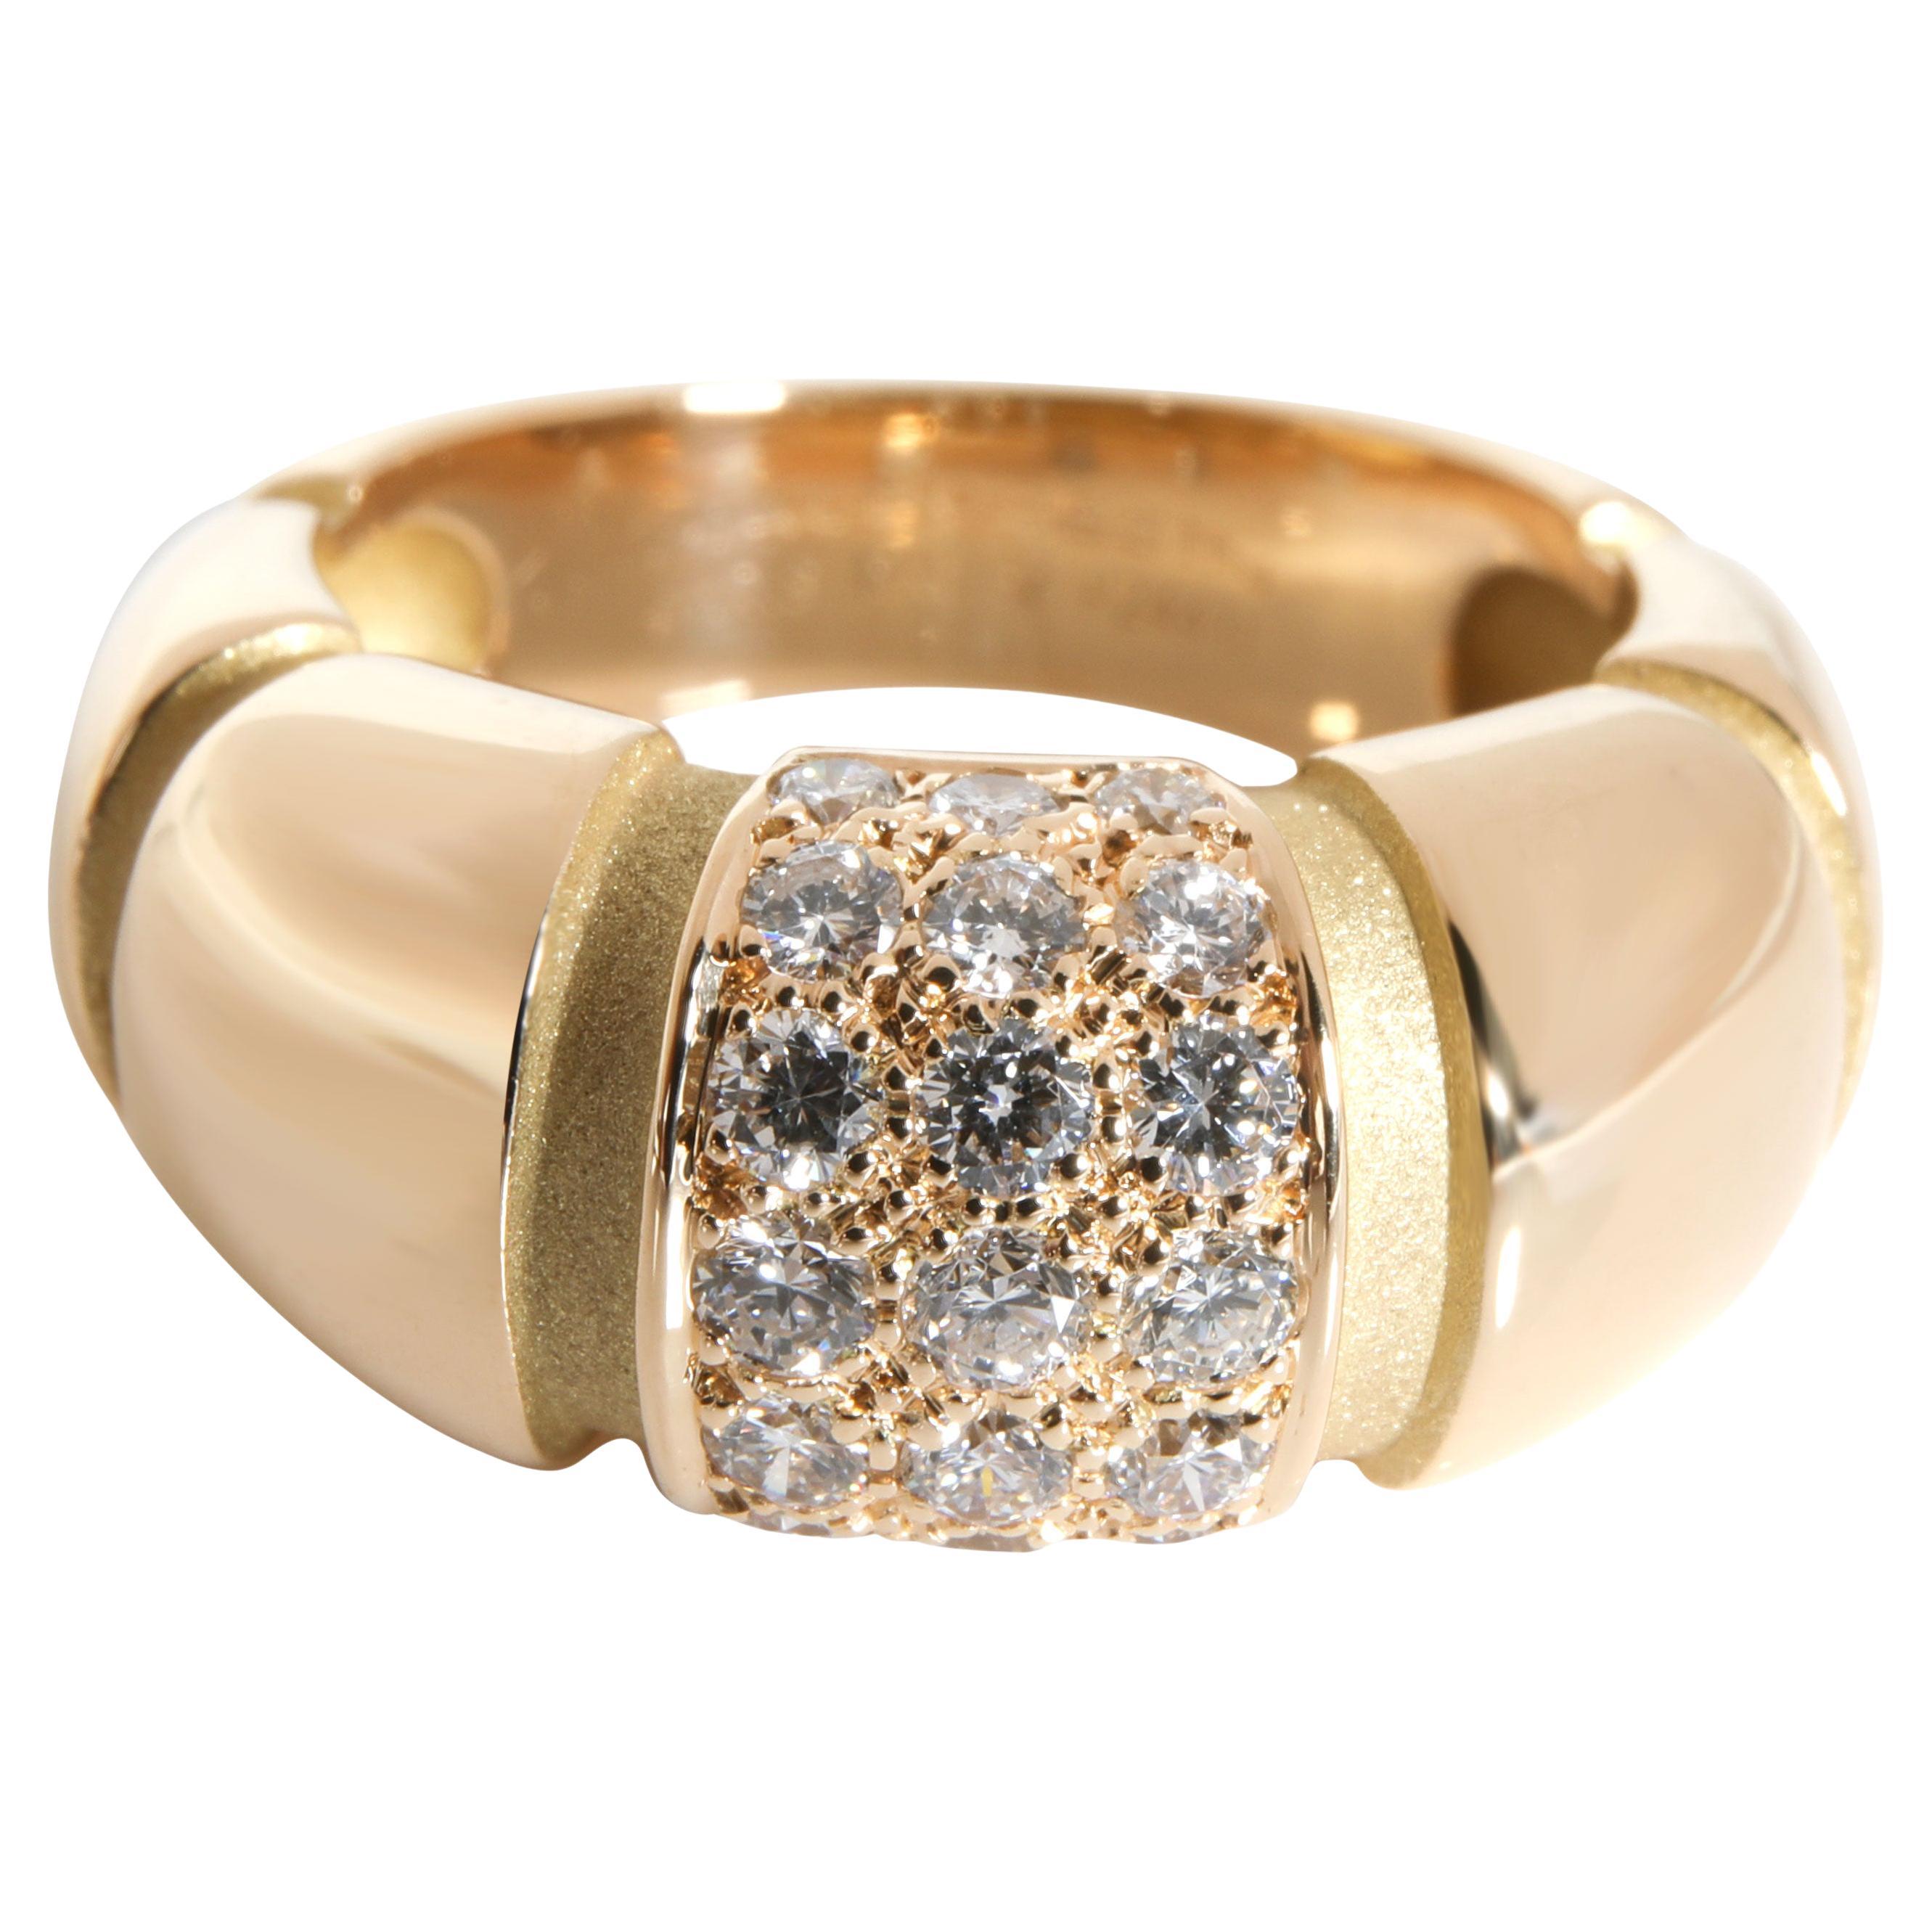 Mauboussin Nadja Diamond Ring in 18k Yellow Gold 0.45 CTW For Sale